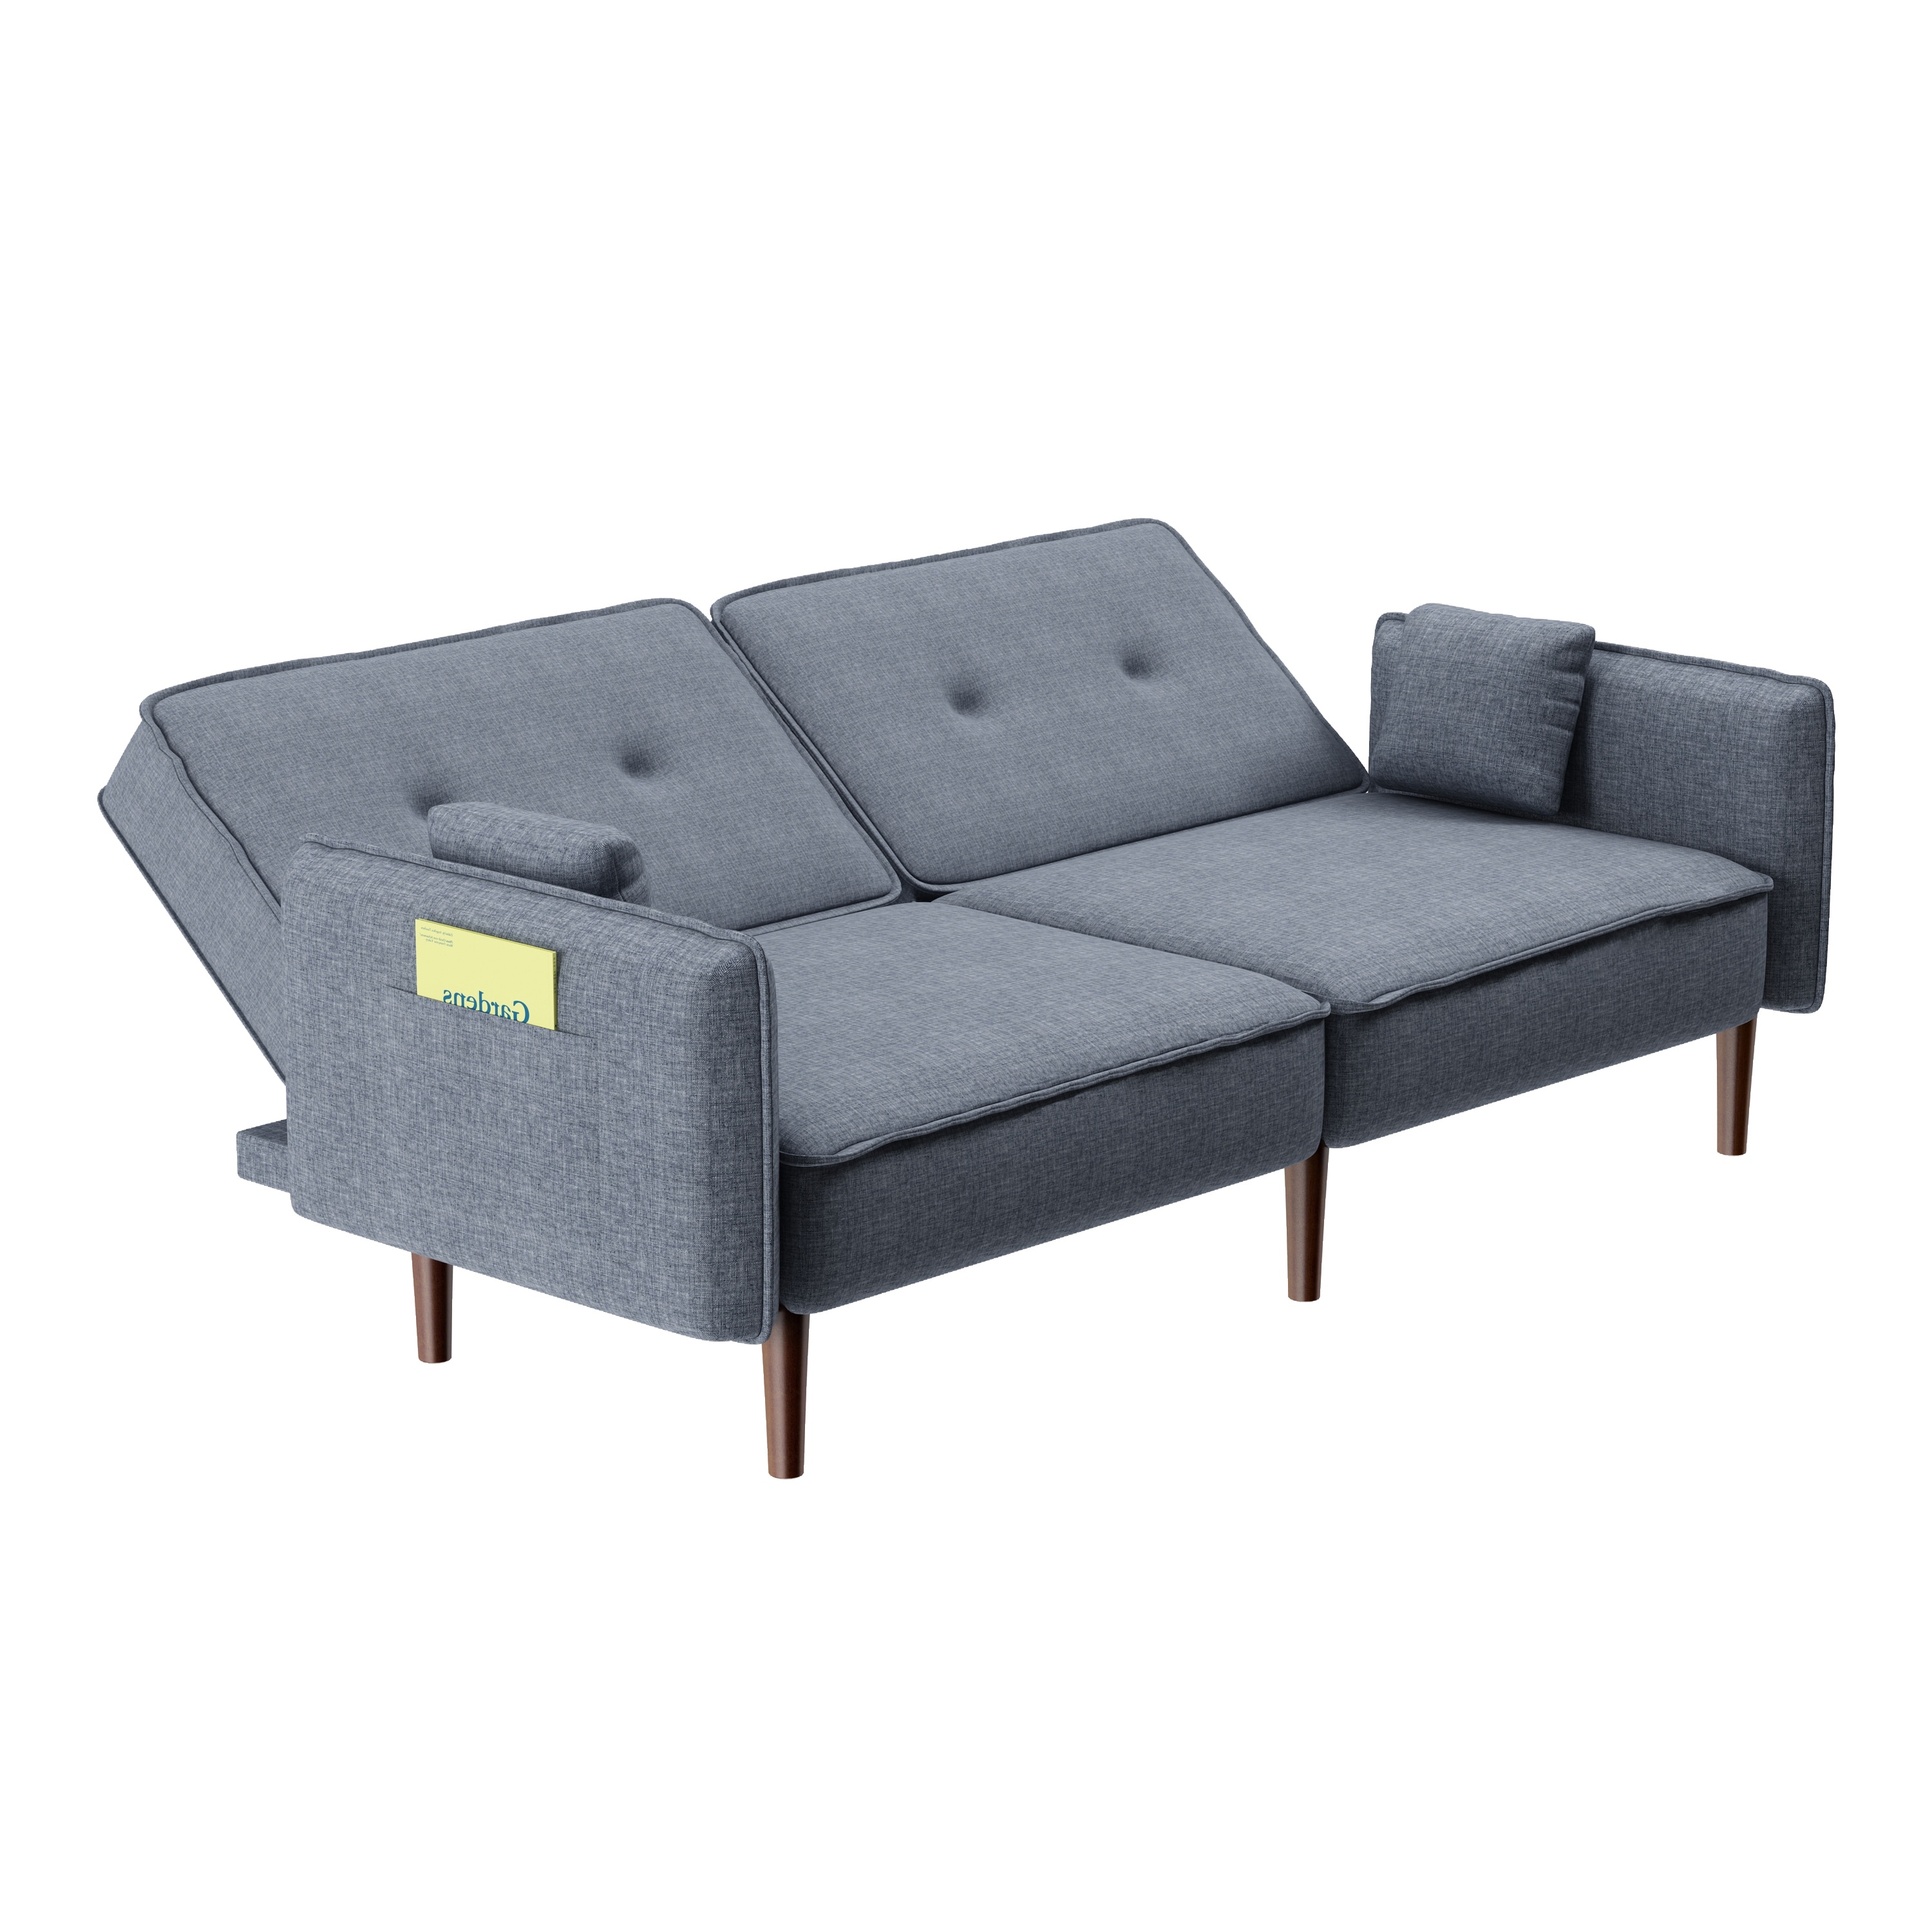 https://ak1.ostkcdn.com/images/products/is/images/direct/7f7ccd78bde3b0df8993b98f11f99d4bcaa4fae6/Convertible-Folding-Futon-Sofa-Bed-Adjusting-Backrest-Loveseat-Polyester-Sofa.jpg